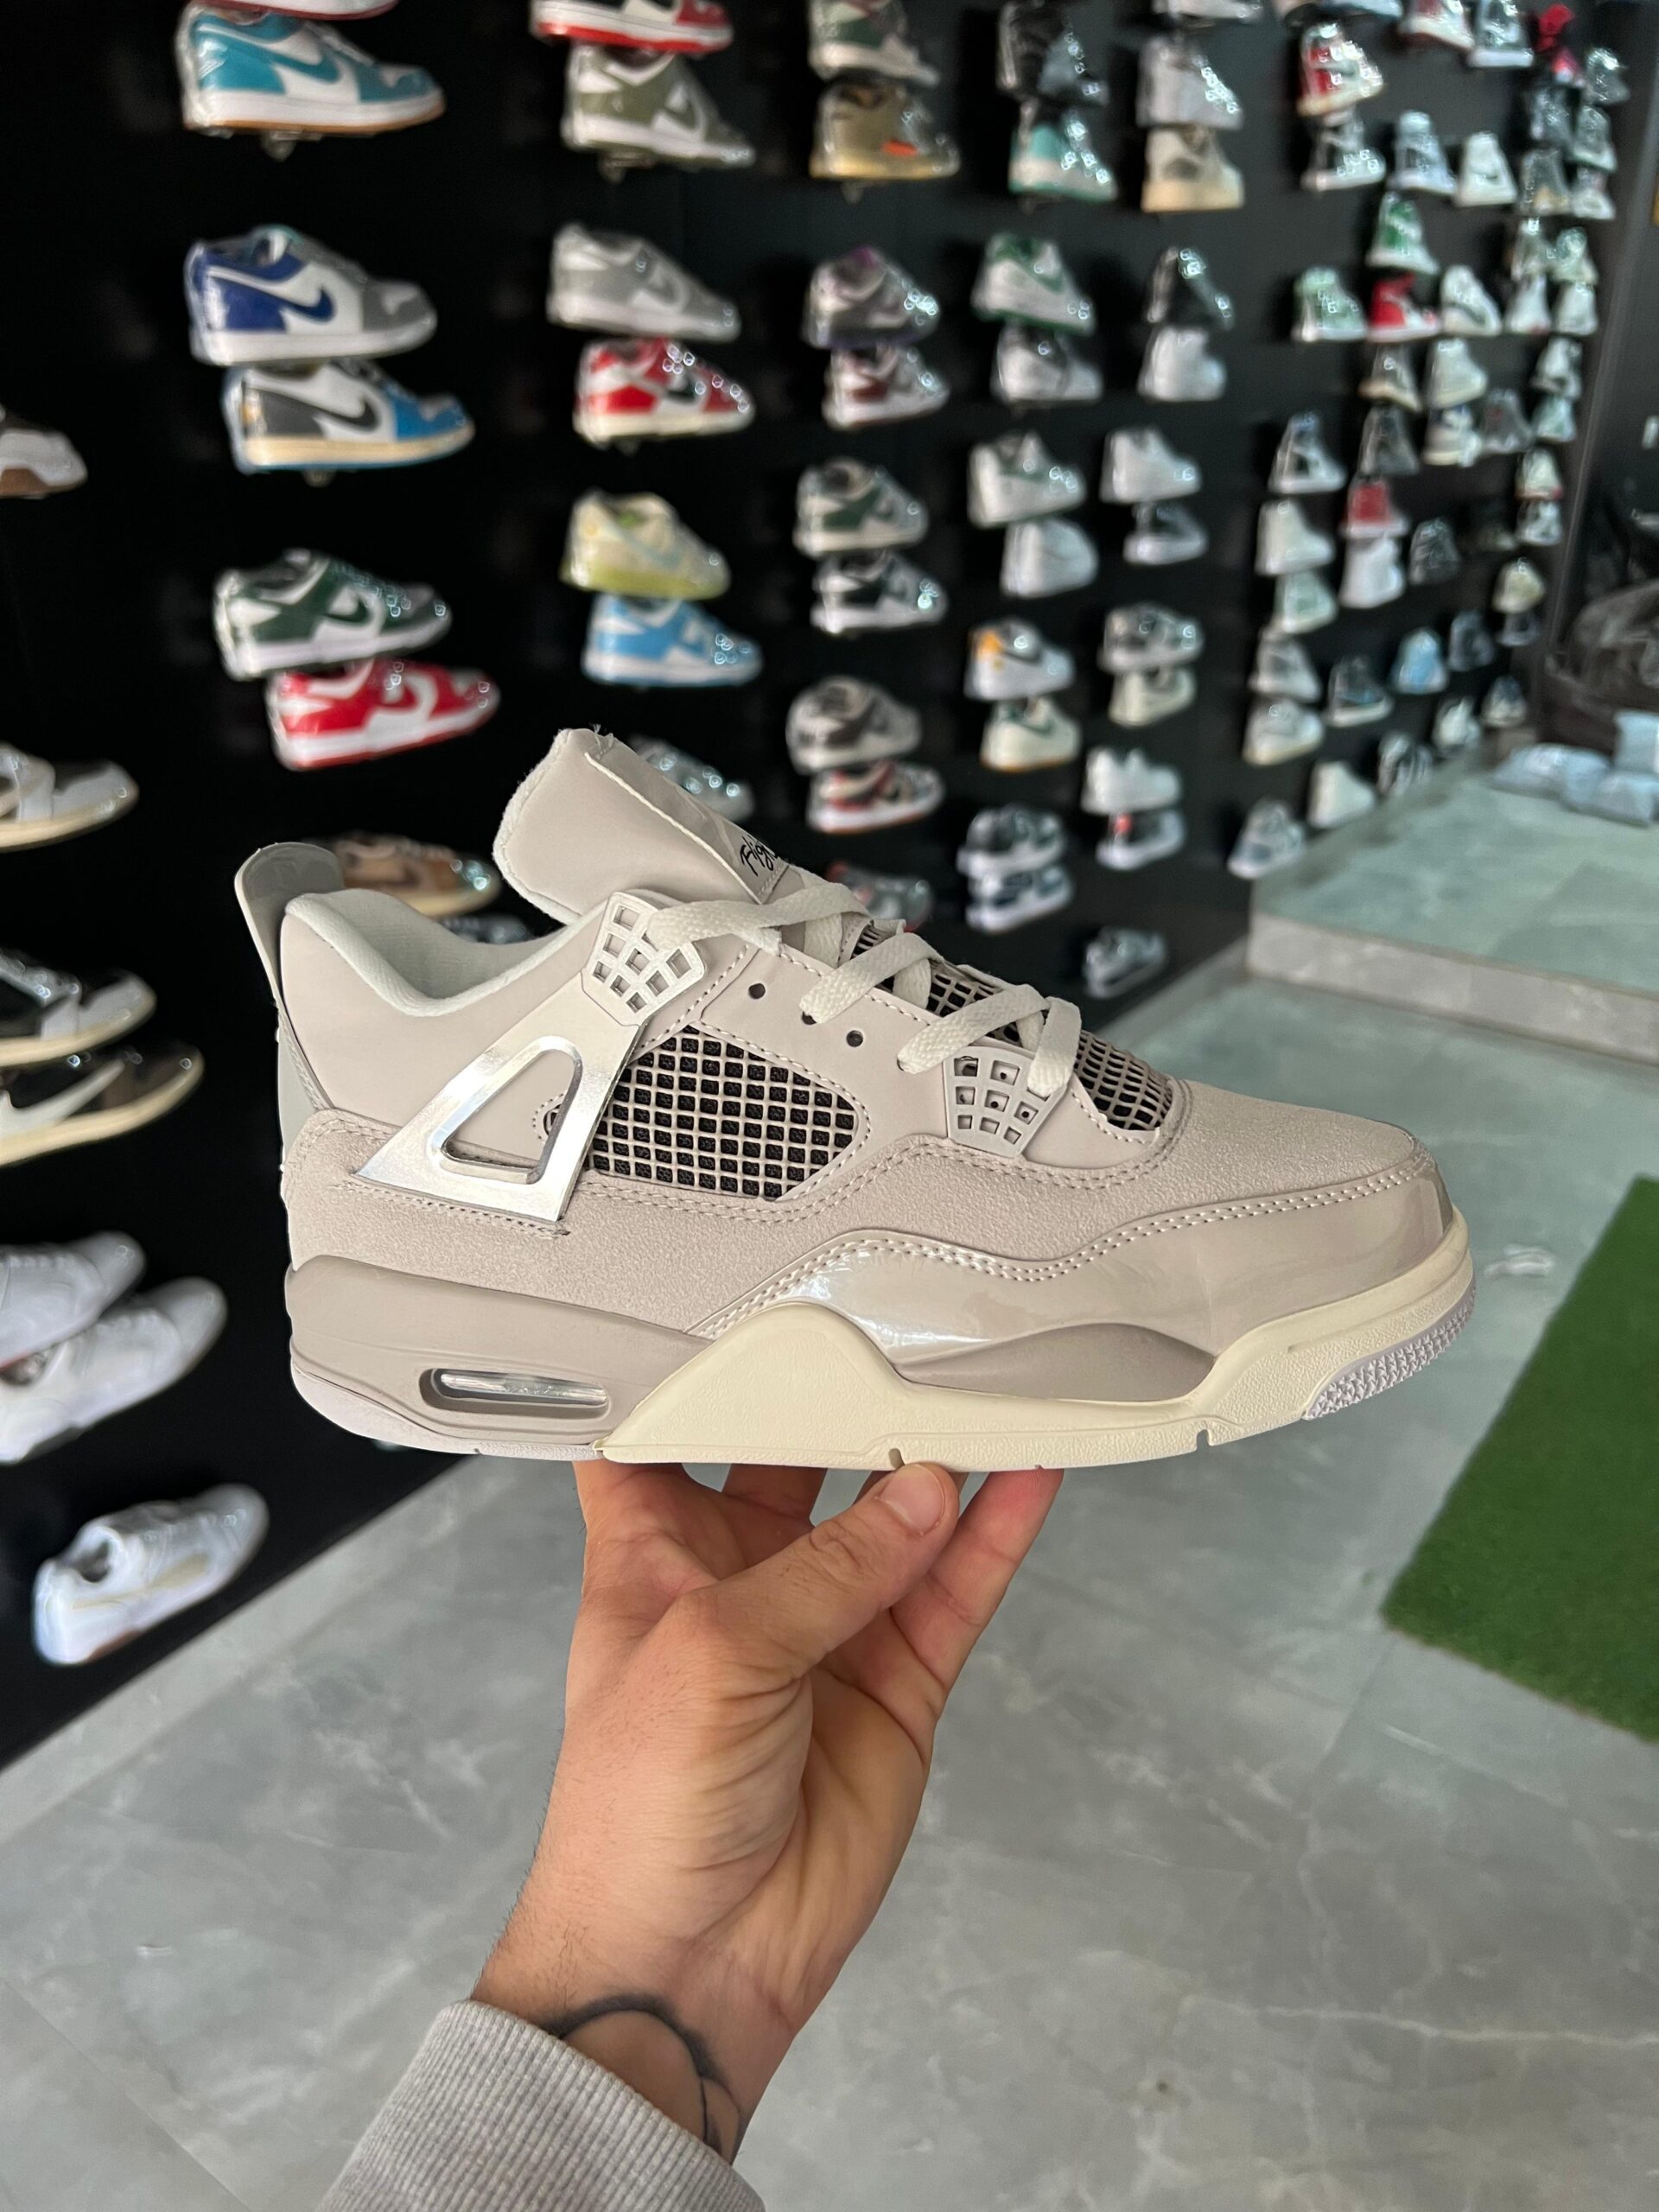 Retro 4 First Copy 5 New Colours In Stock